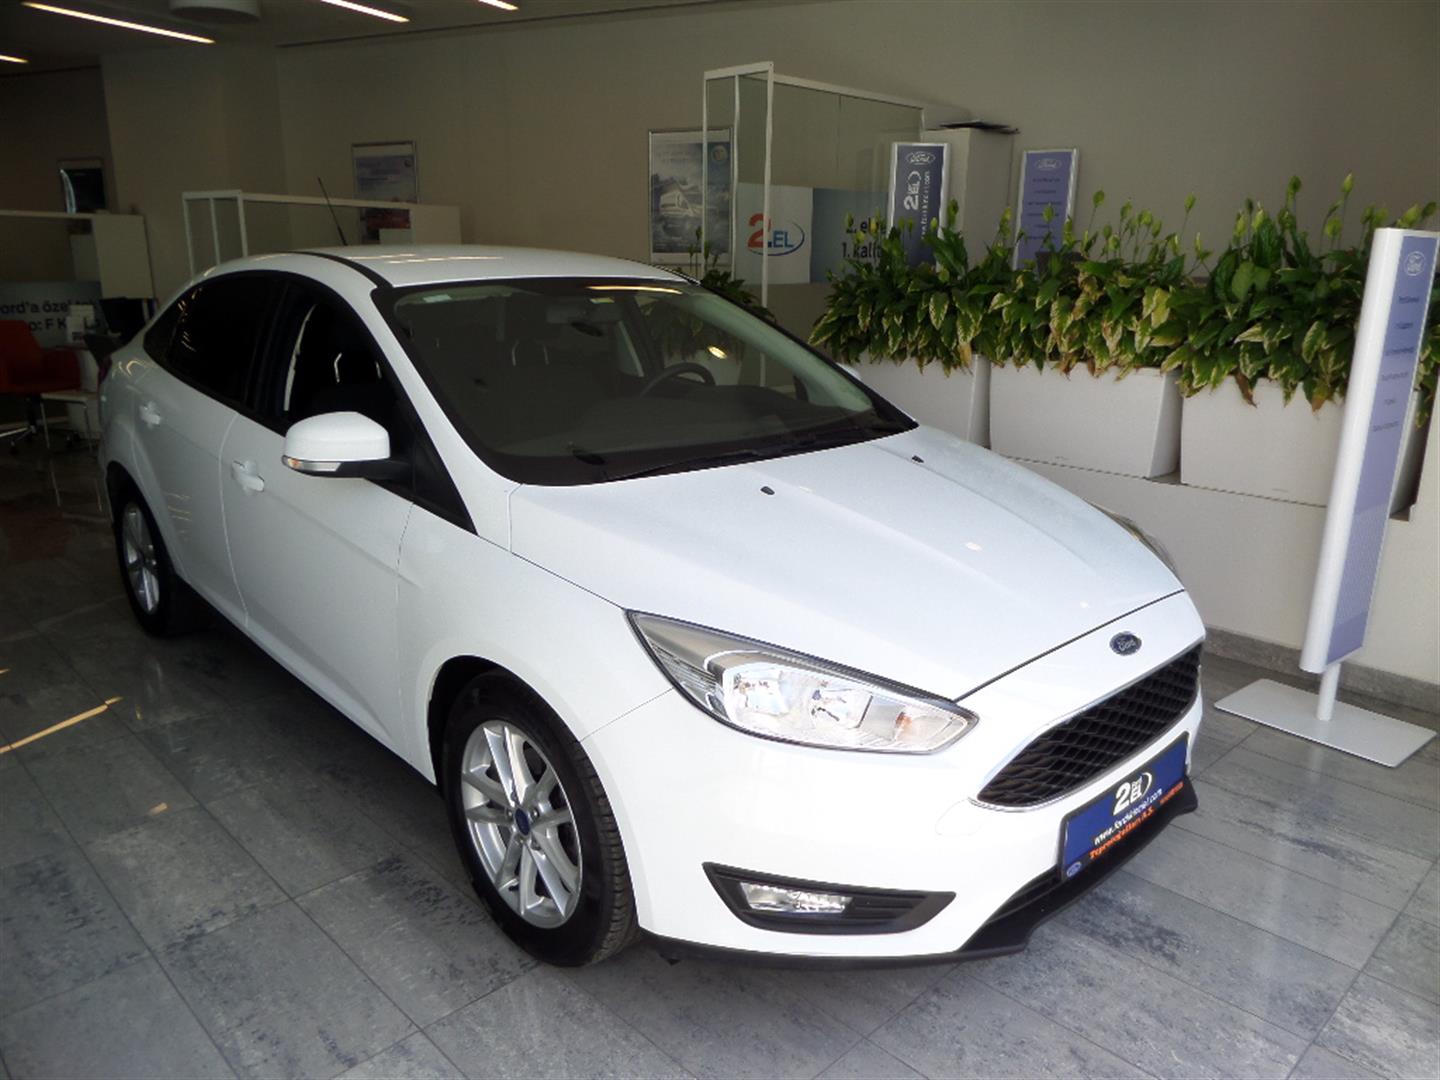 1.6 TDCI Ford Focus Turbo - YouTube